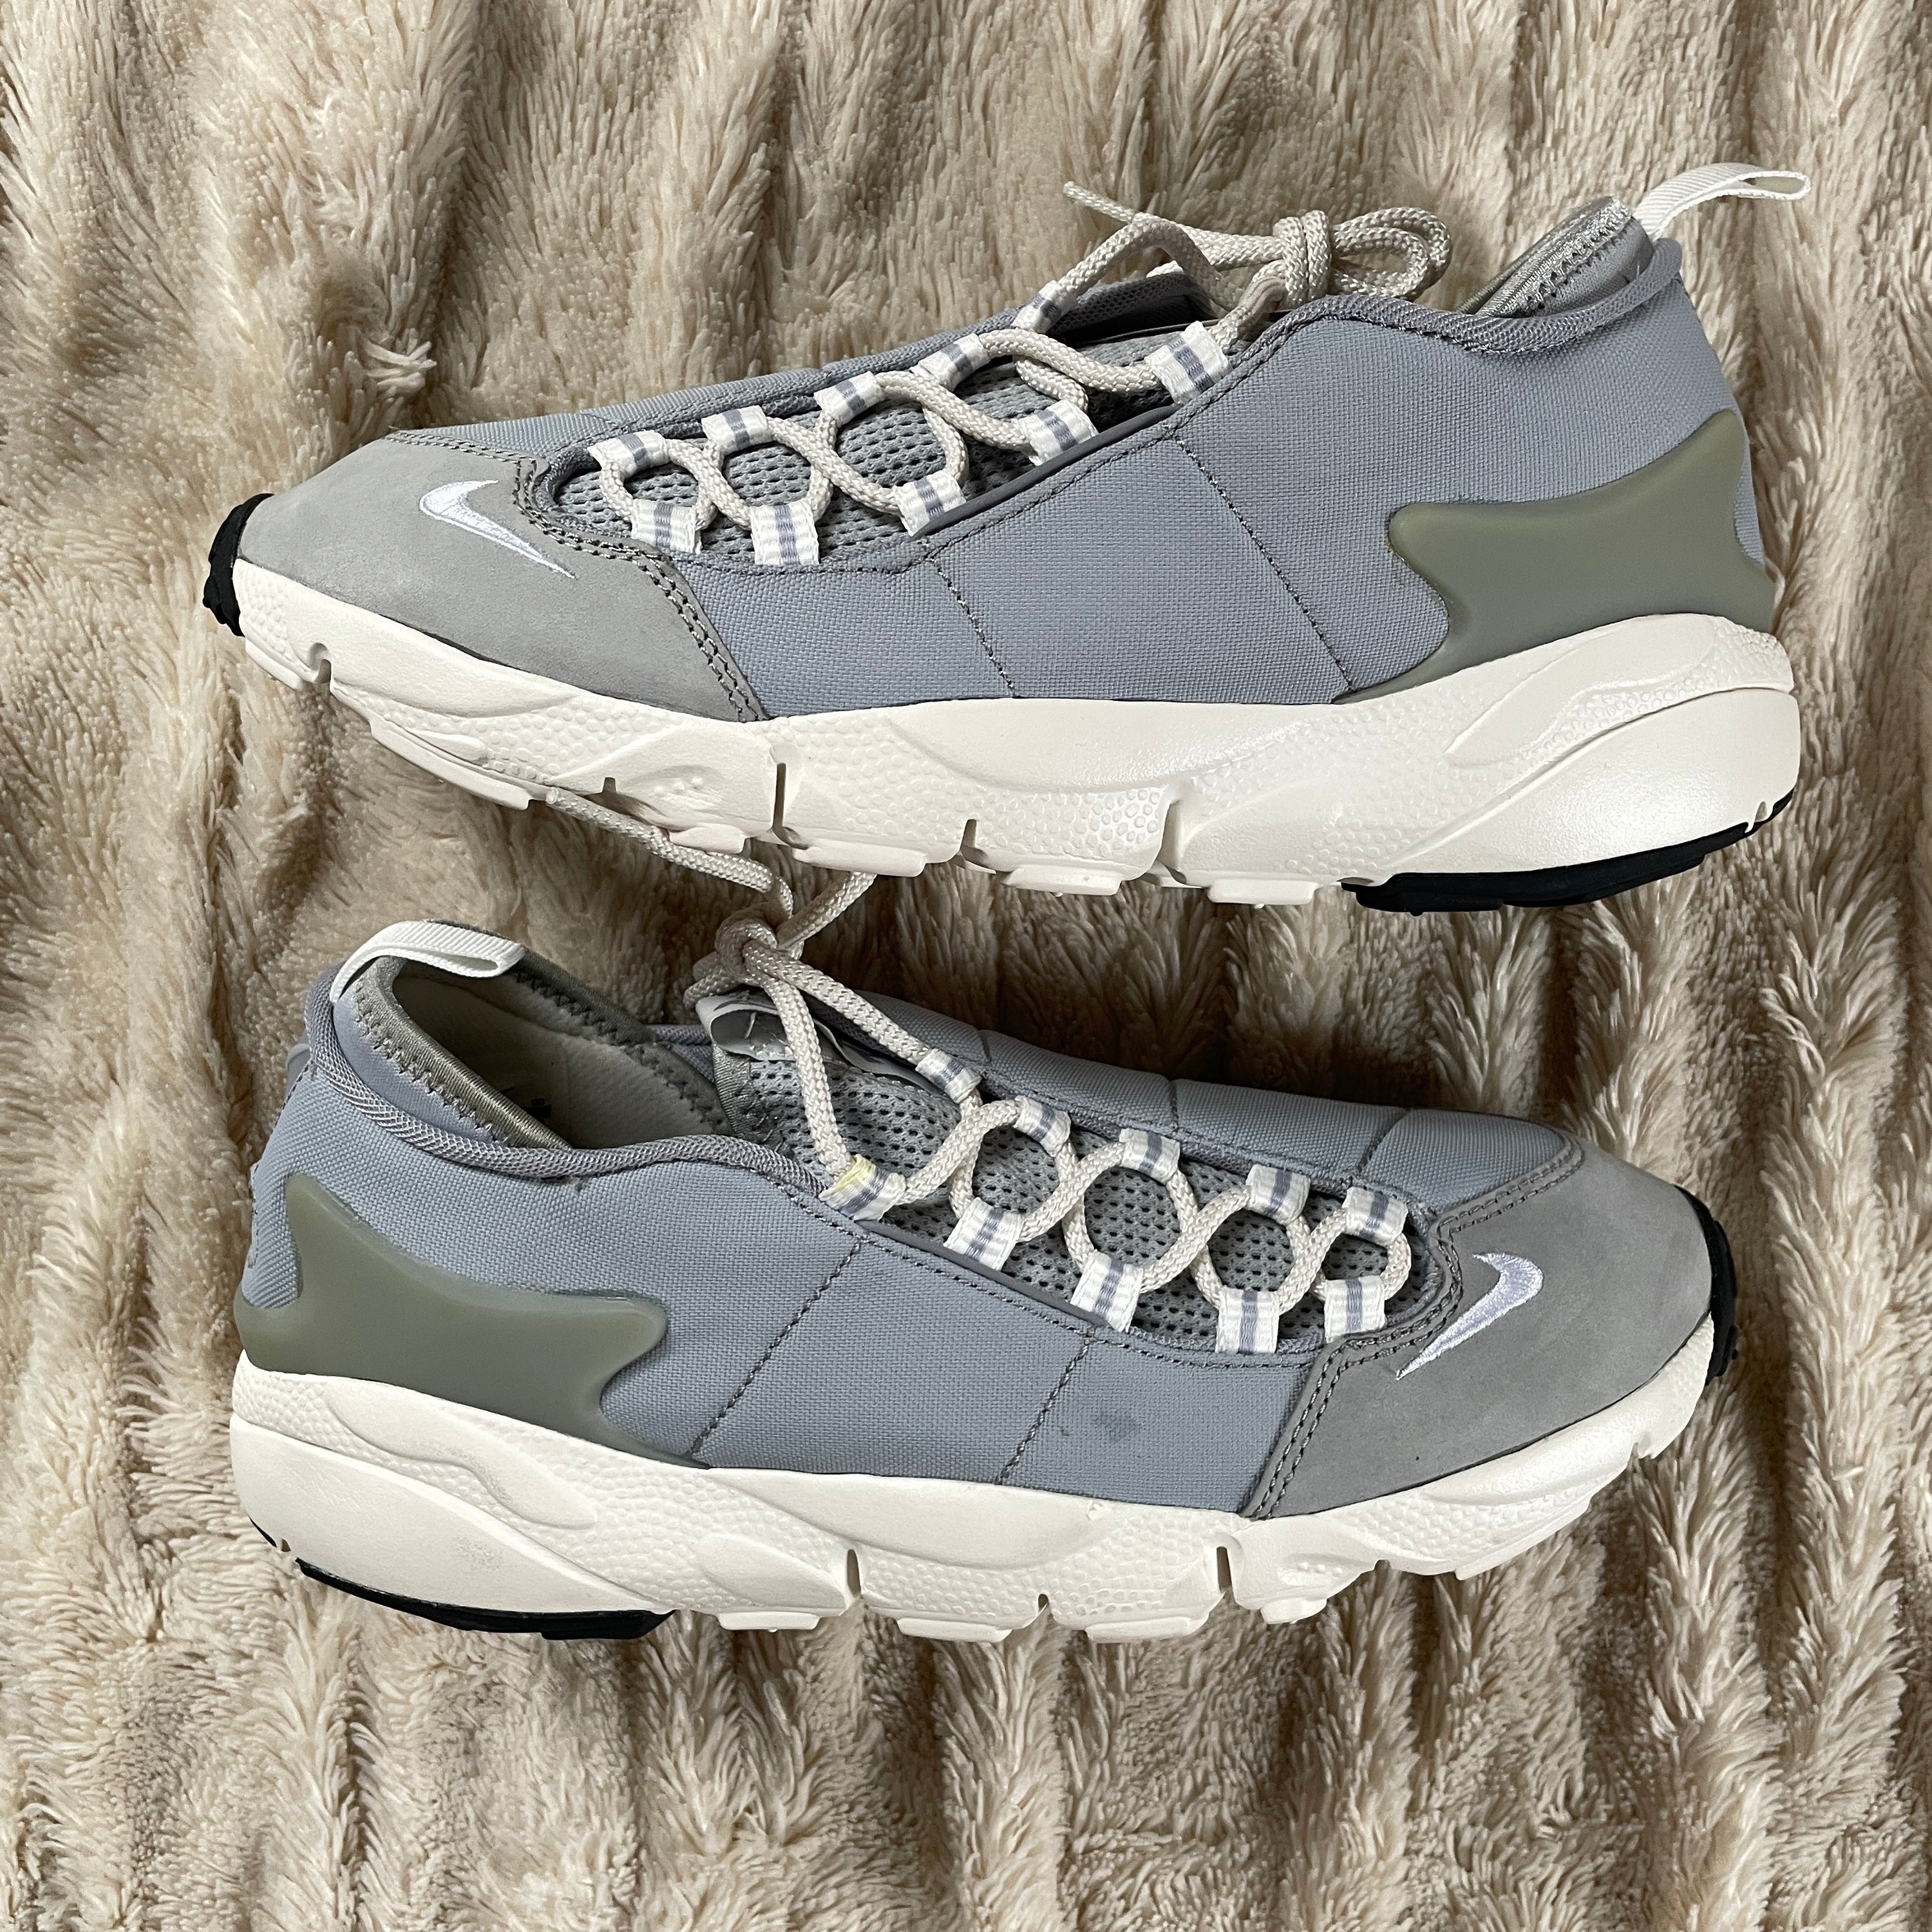 US 11 - NIKE AIR FOOTSCAPE NM "WOLF GREY" [2016]